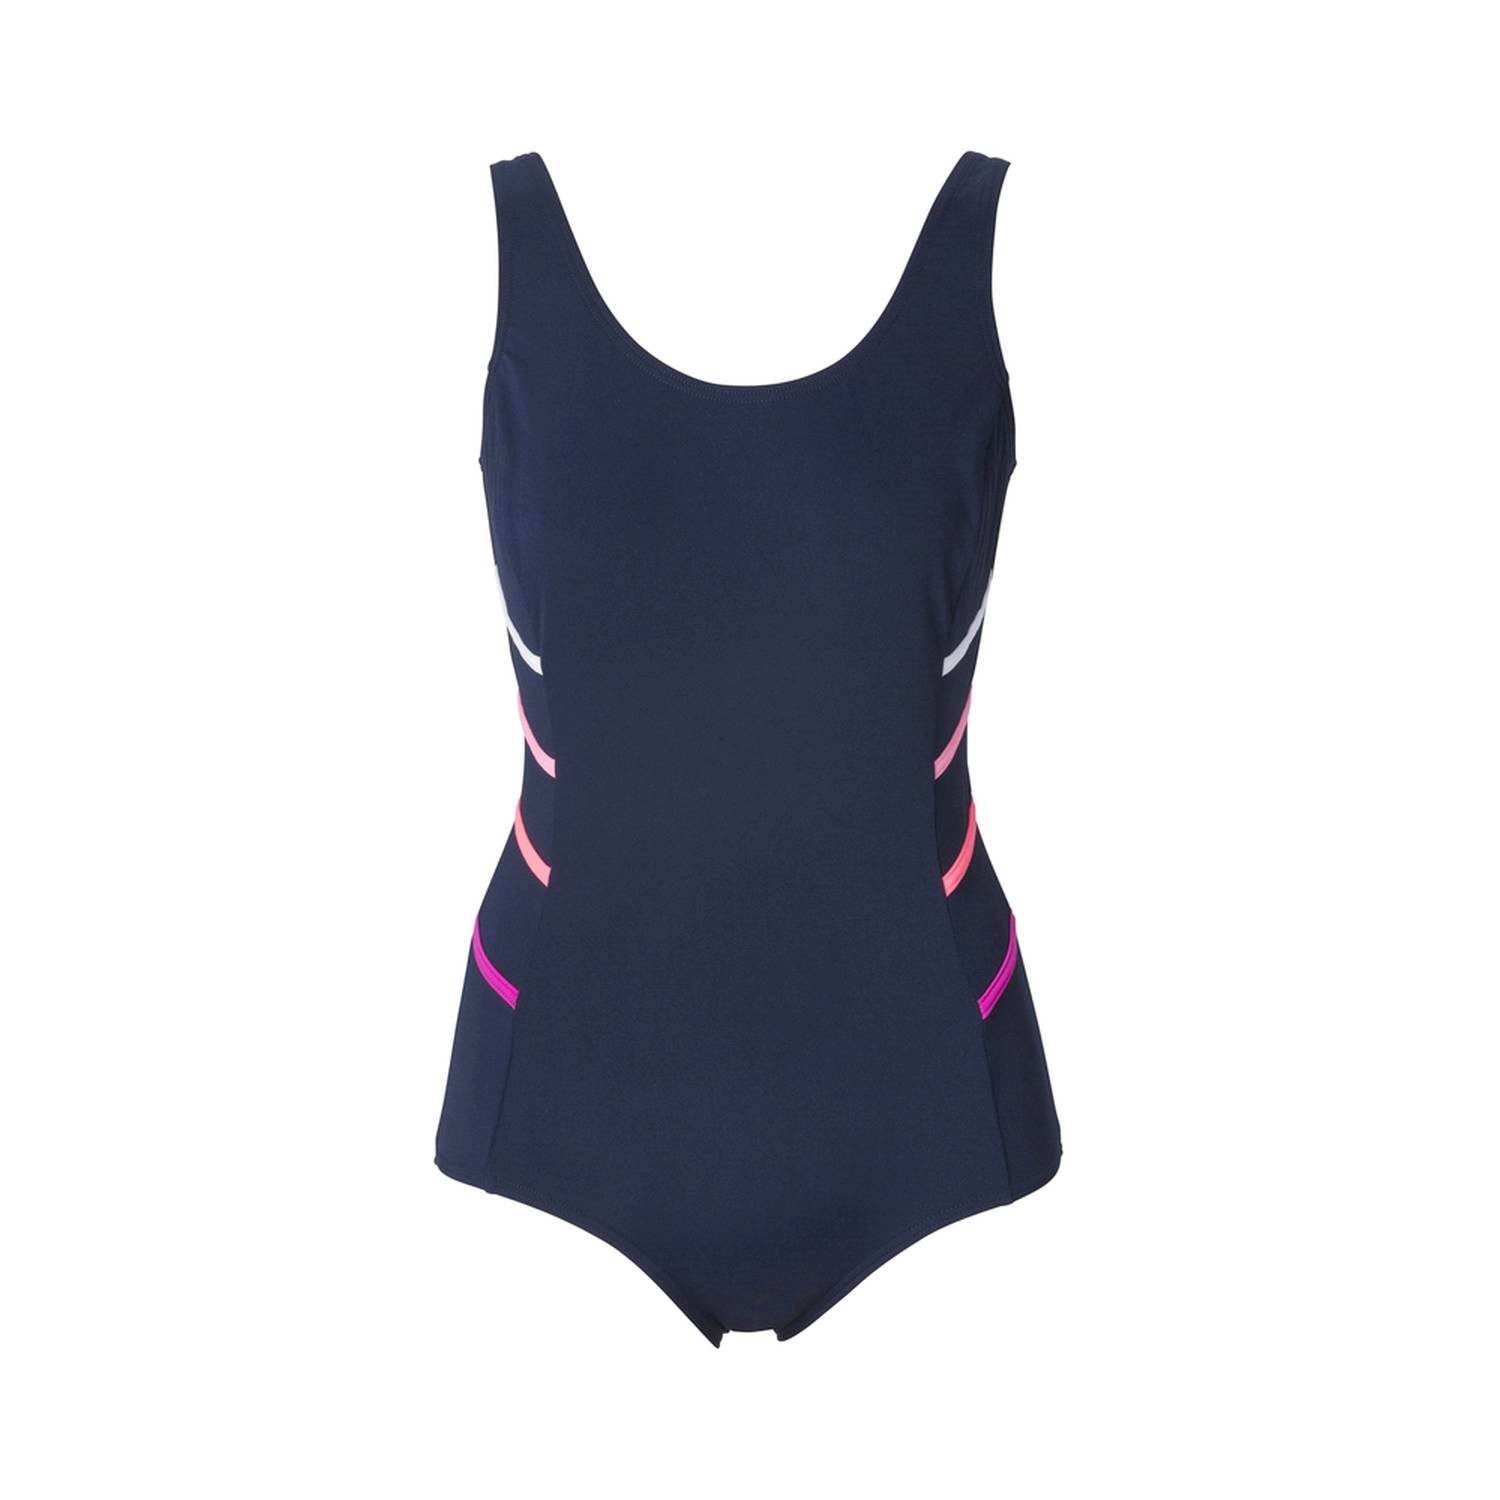 Trofe Swimsuit With Bust Lining And Stripes